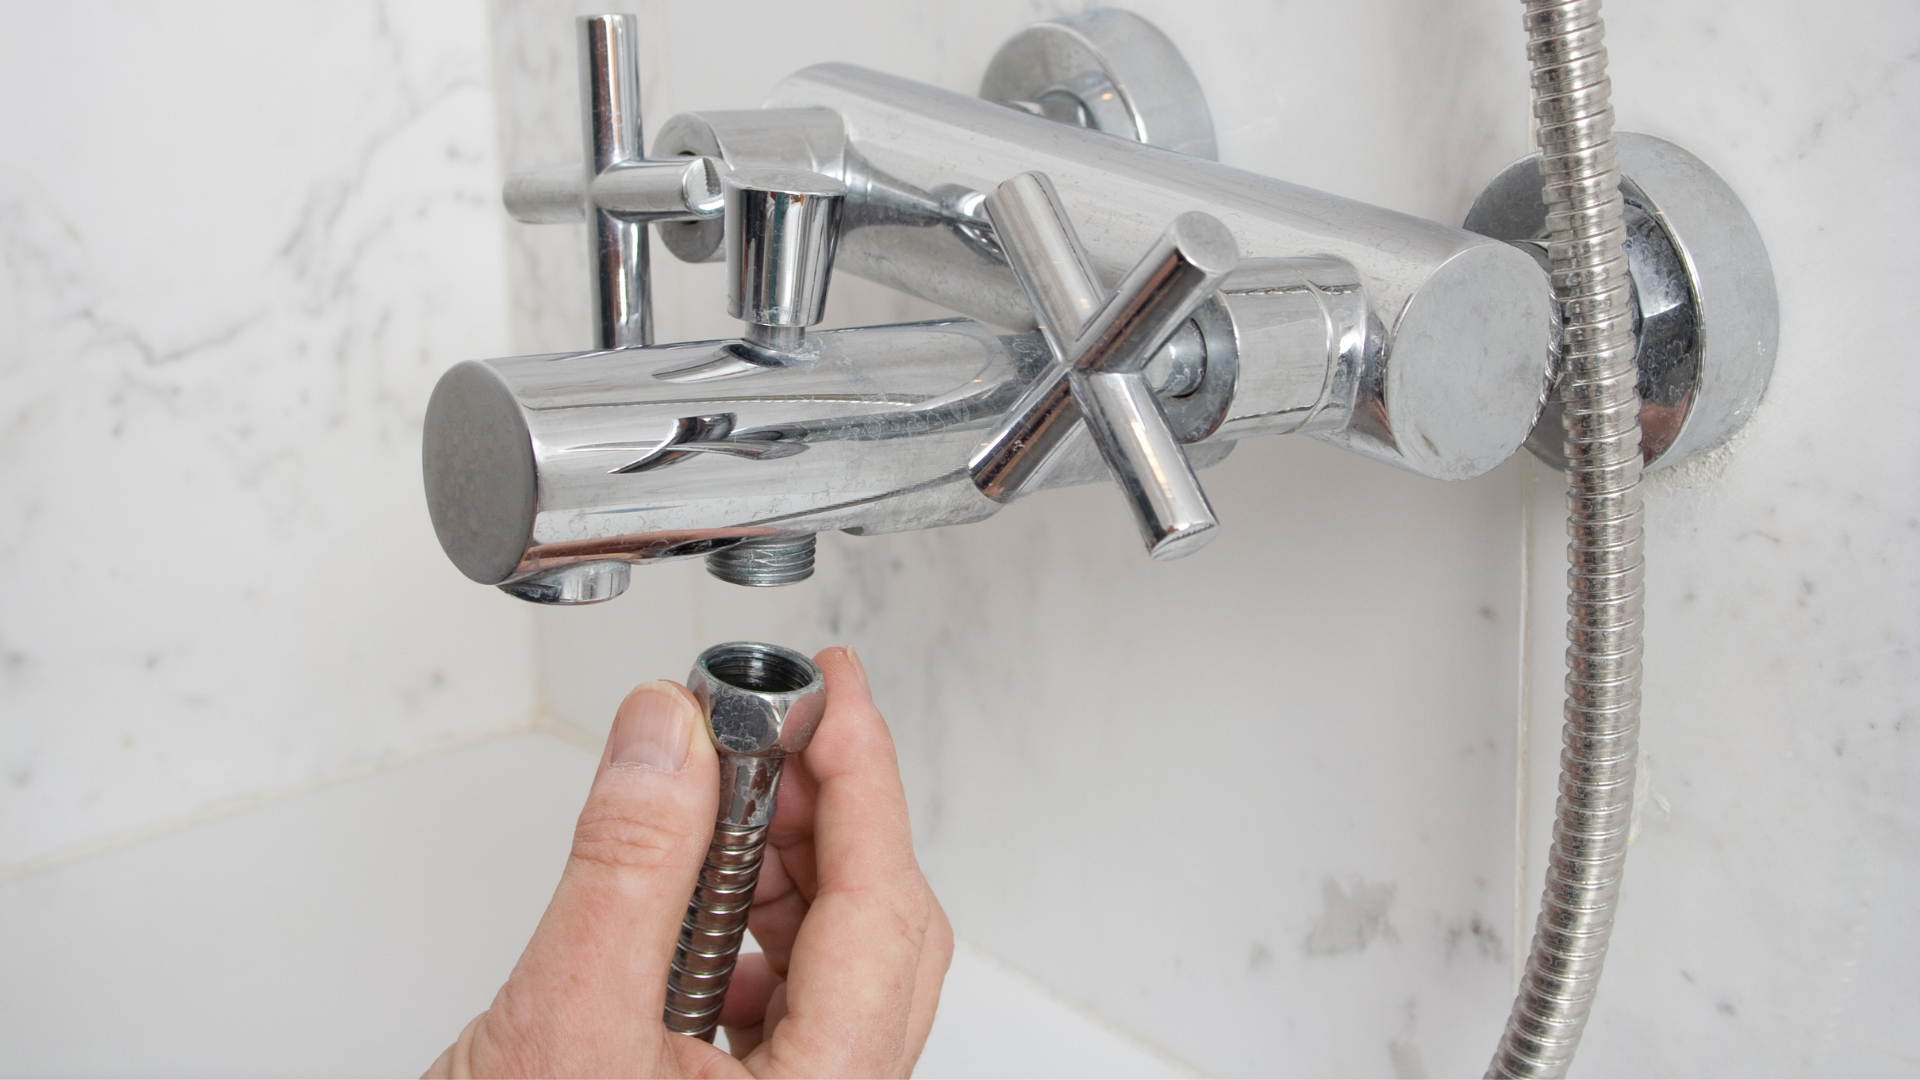 Faucet Repair & Installation in Charleston, SC from Fix-it 24/7 Air Conditioning, Plumbing & Heating